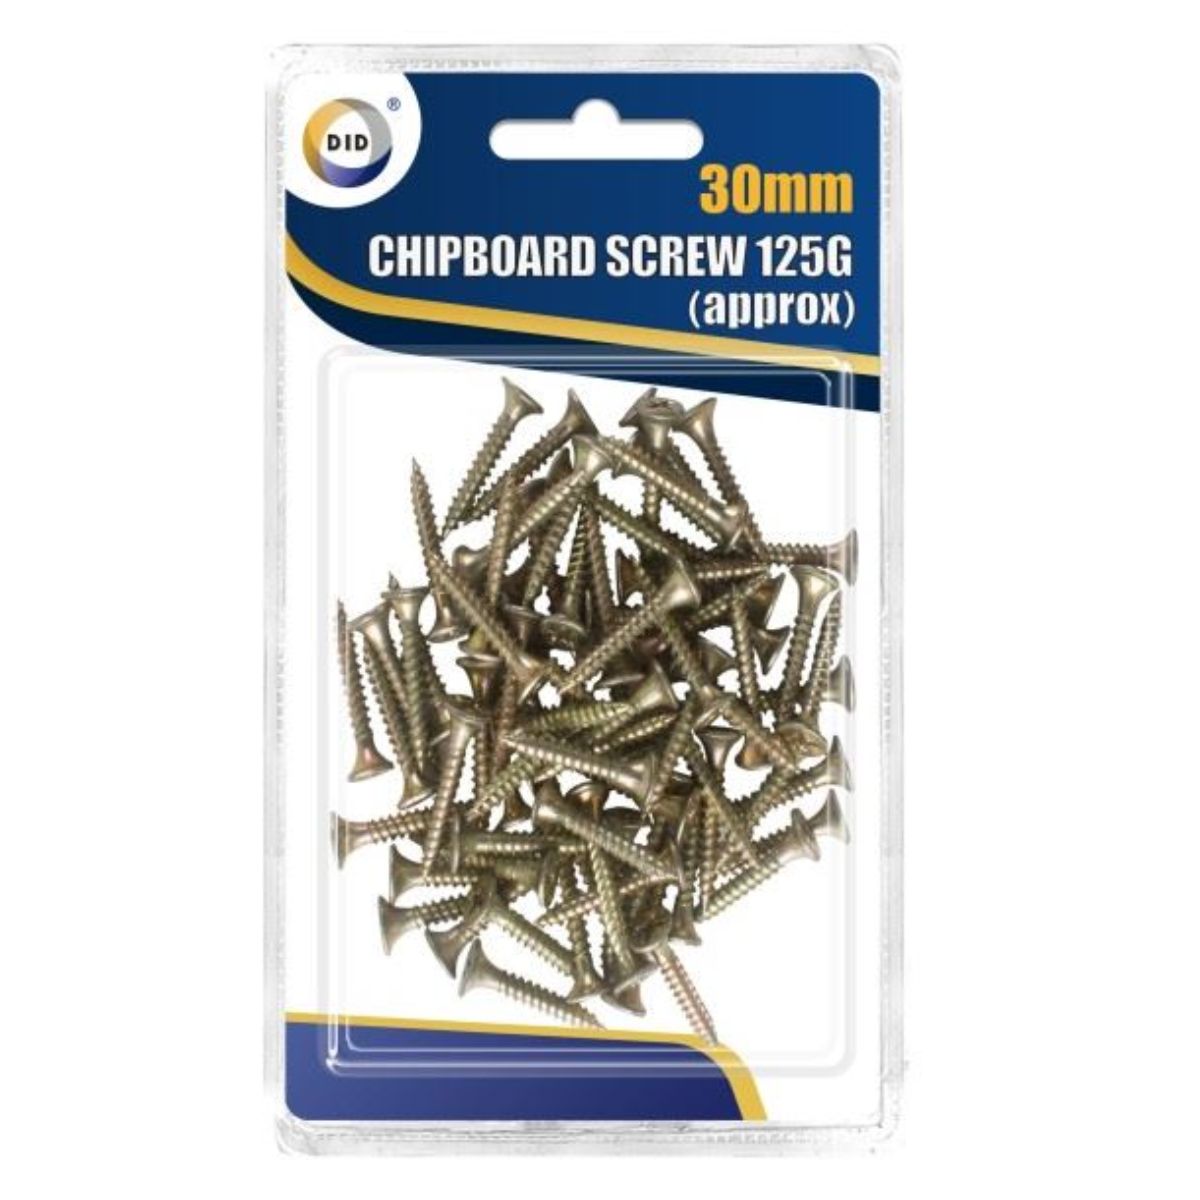 A package of DID - Chipboard Screws 30mm - 125g, displayed on a blue and white card.